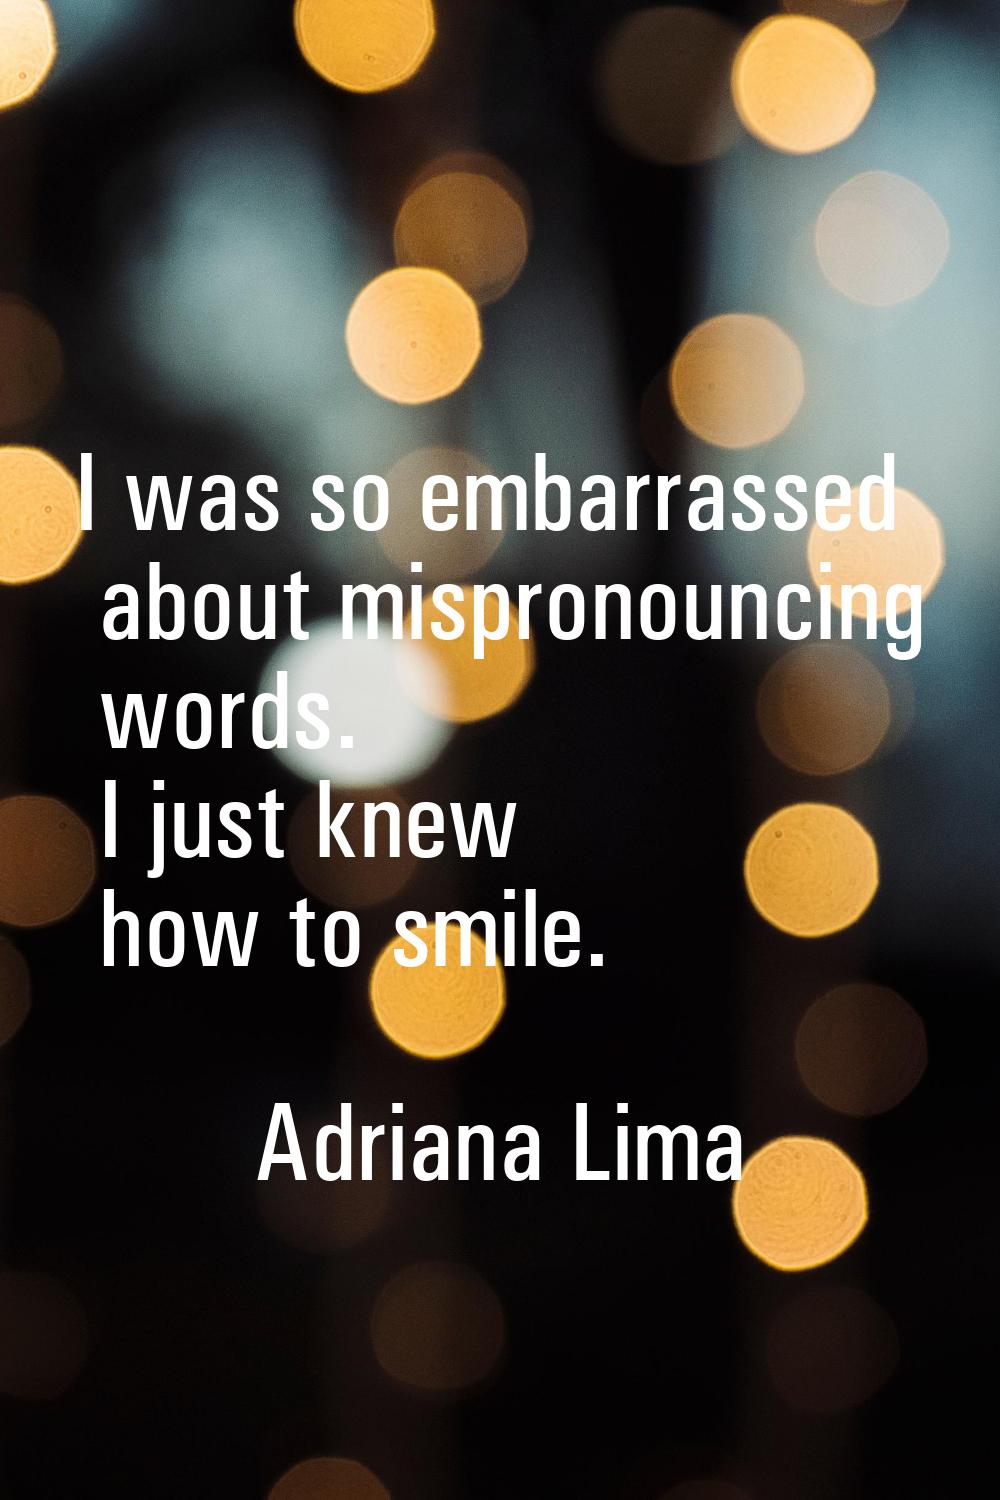 I was so embarrassed about mispronouncing words. I just knew how to smile.